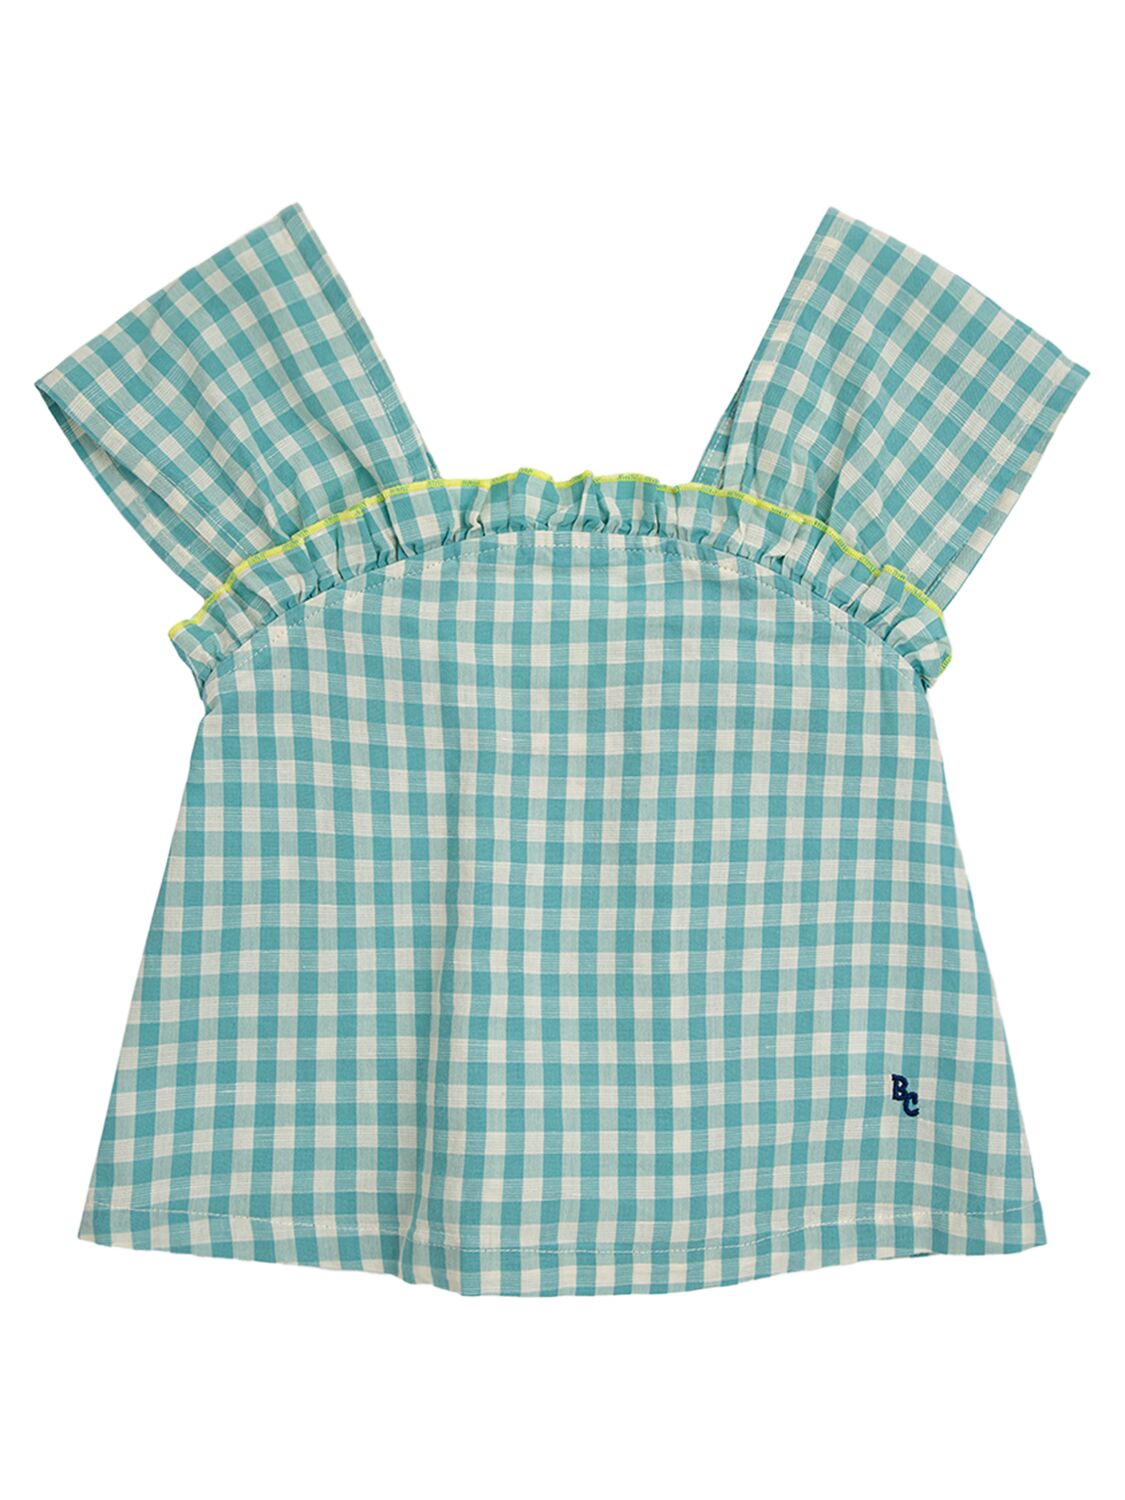 Bobo Choses Kids' Printed Cotton & Linen Top In Light Blue